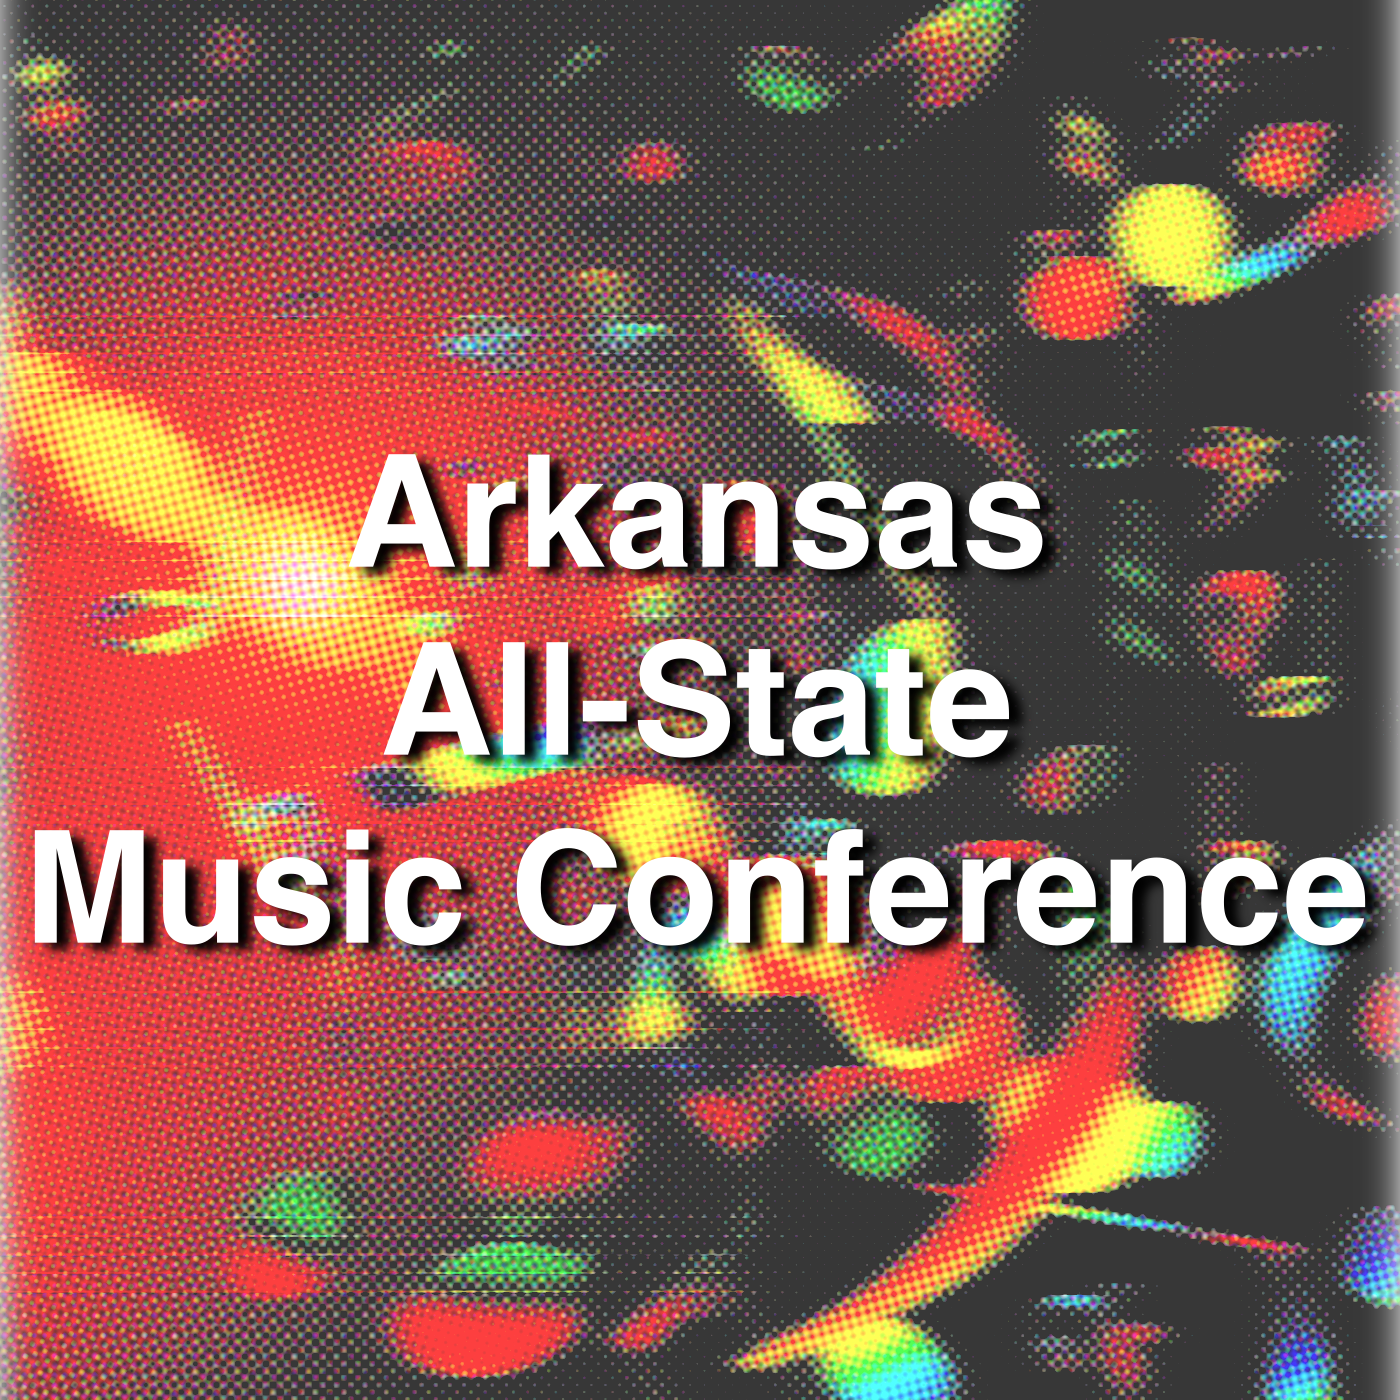 Arkansas All-State Music Conference